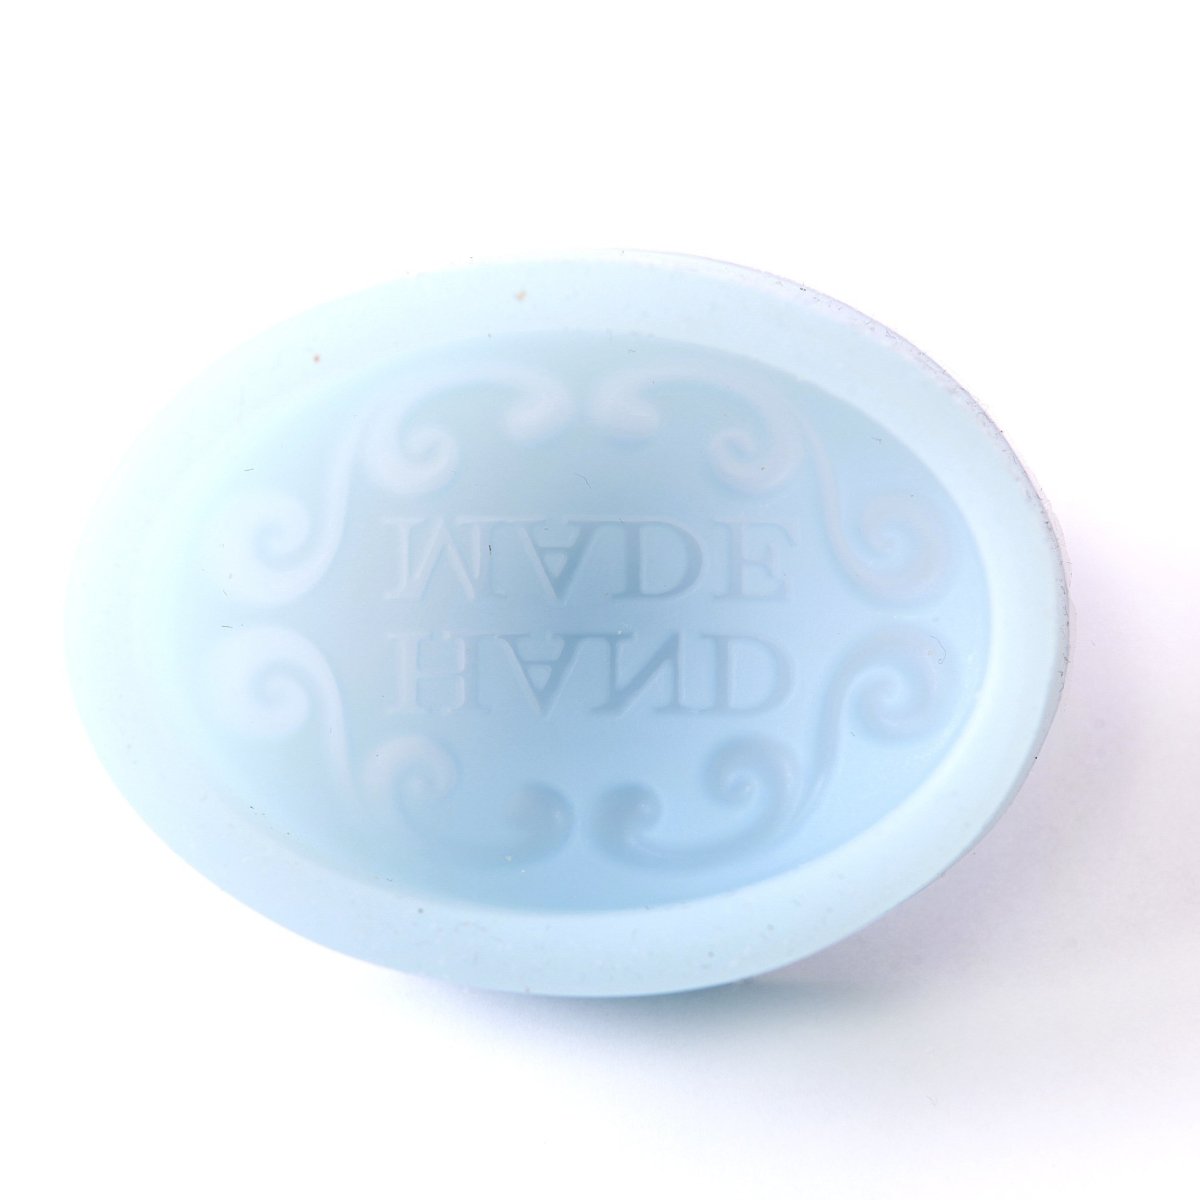 Hand Made In Oval Silicone Soap Mould R0256 - Mystic Moments UK